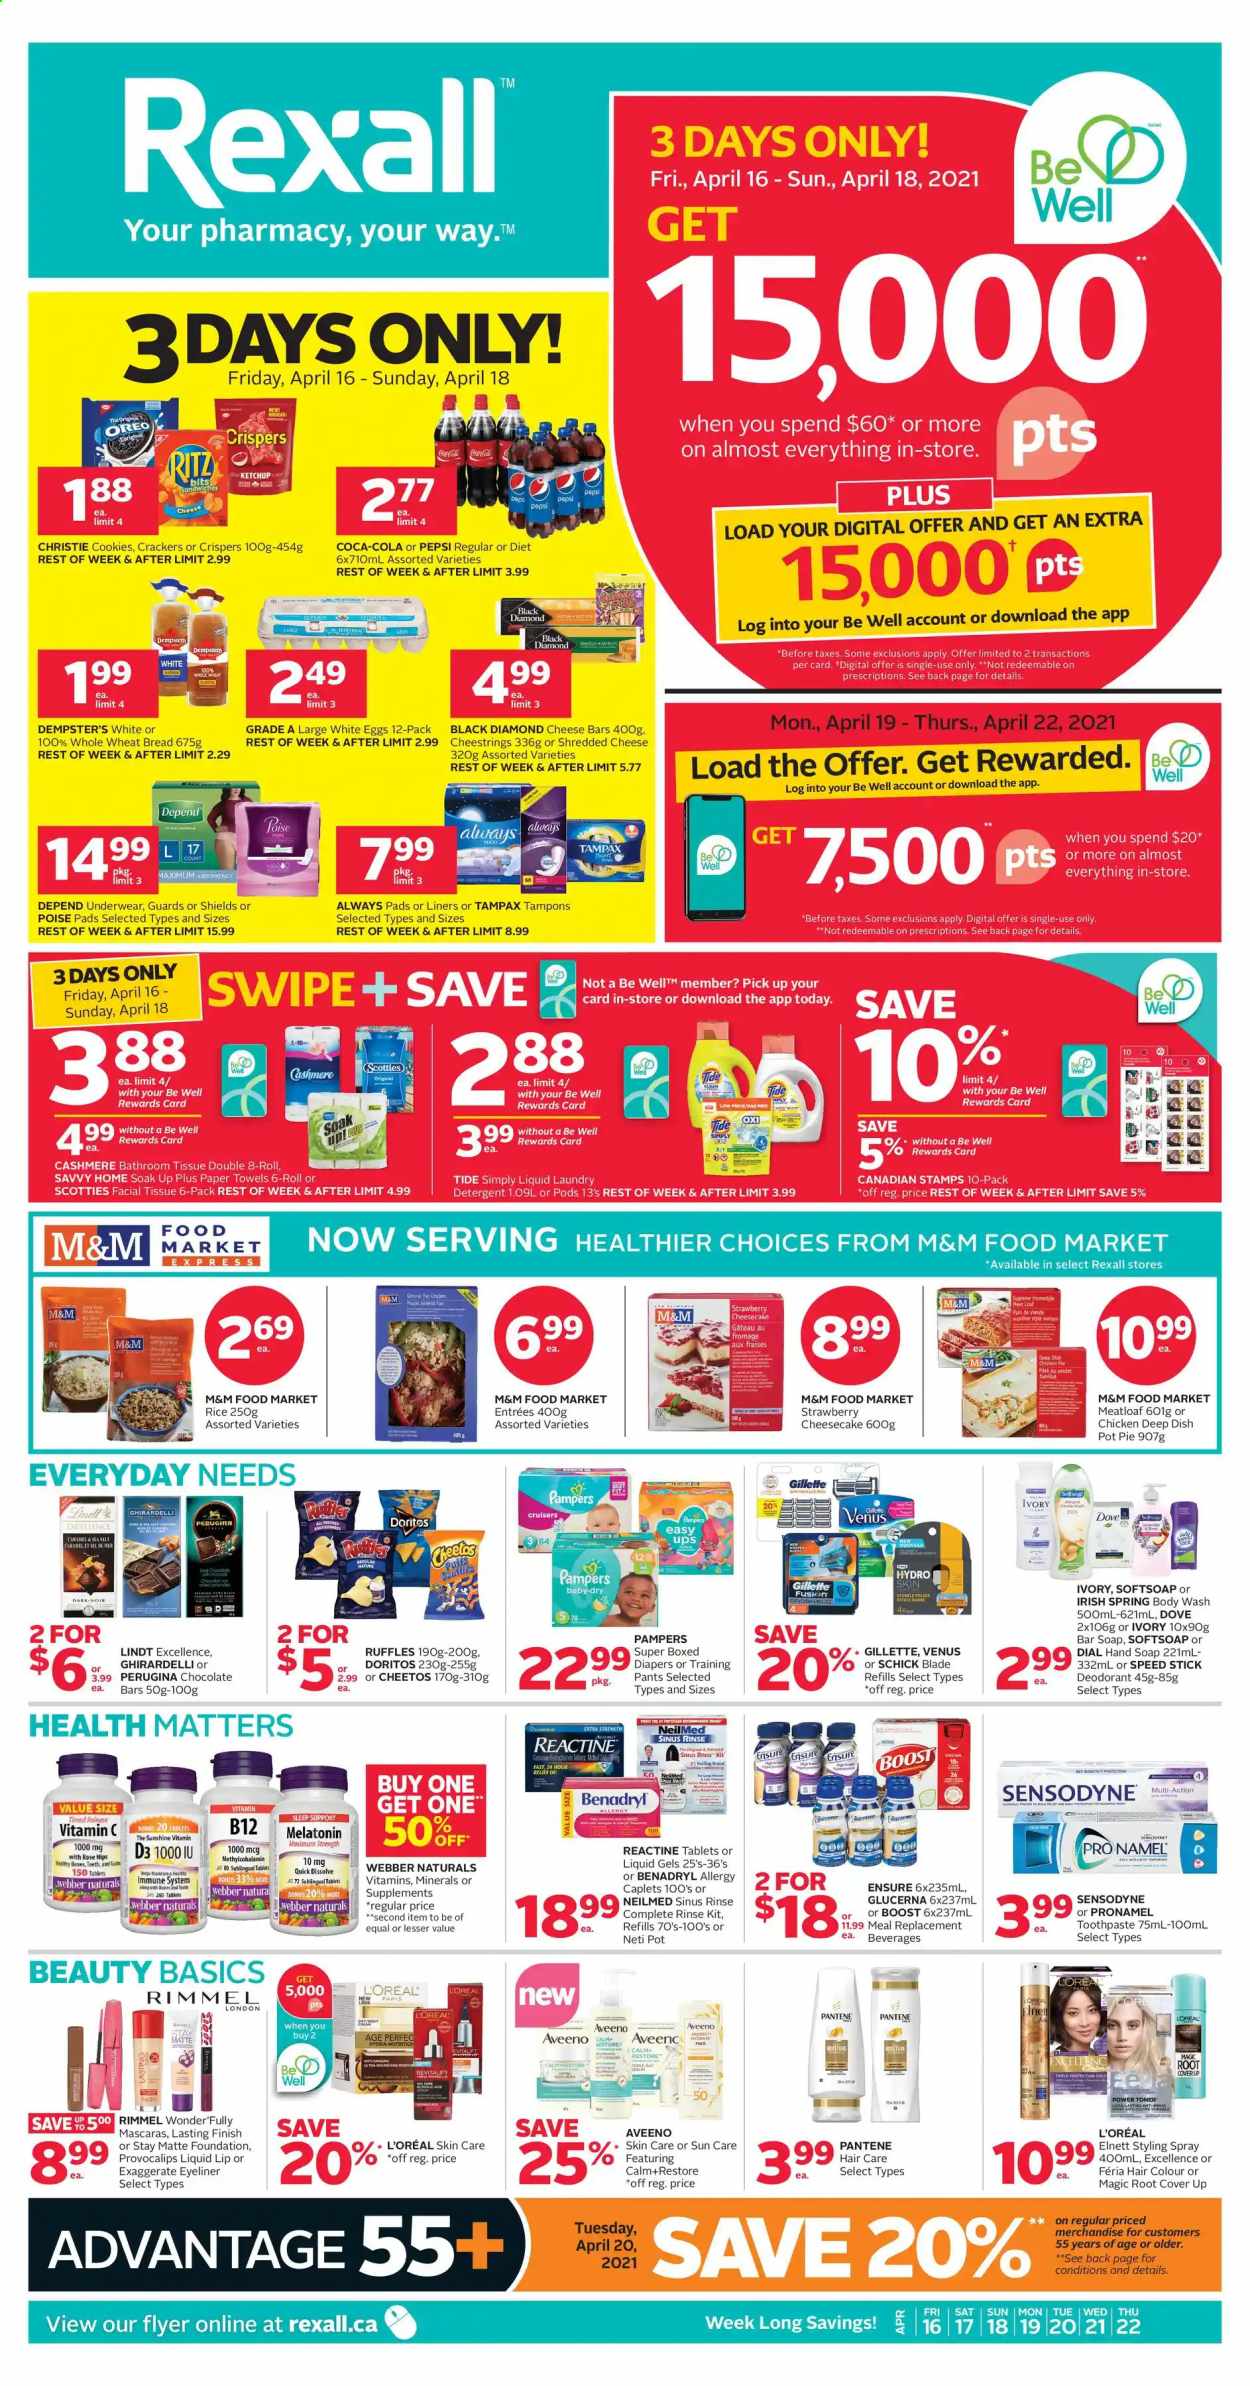 thumbnail - Rexall Flyer - April 16, 2021 - April 22, 2021 - Sales products - cookies, crackers, Ghirardelli, RITZ, chocolate bar, Doritos, Cheetos, Ruffles, Ace, rice, caramel, Coca-Cola, Pepsi, Boost, rosé wine, pants, nappies, Aveeno, bath tissue, kitchen towels, paper towels, Tide, laundry detergent, body wash, Softsoap, hand soap, soap bar, Dial, soap, toothpaste, Always pads, sanitary pads, tampons, L’Oréal, hair color, anti-perspirant, Speed Stick, Schick, Venus, Rimmel, eyeliner, pot, vitamin c, Glucerna, vitamin D3, Oreo, Gillette, Tampax, toner, Pampers, Pantene, Sensodyne, M&M's, deodorant. Page 1.